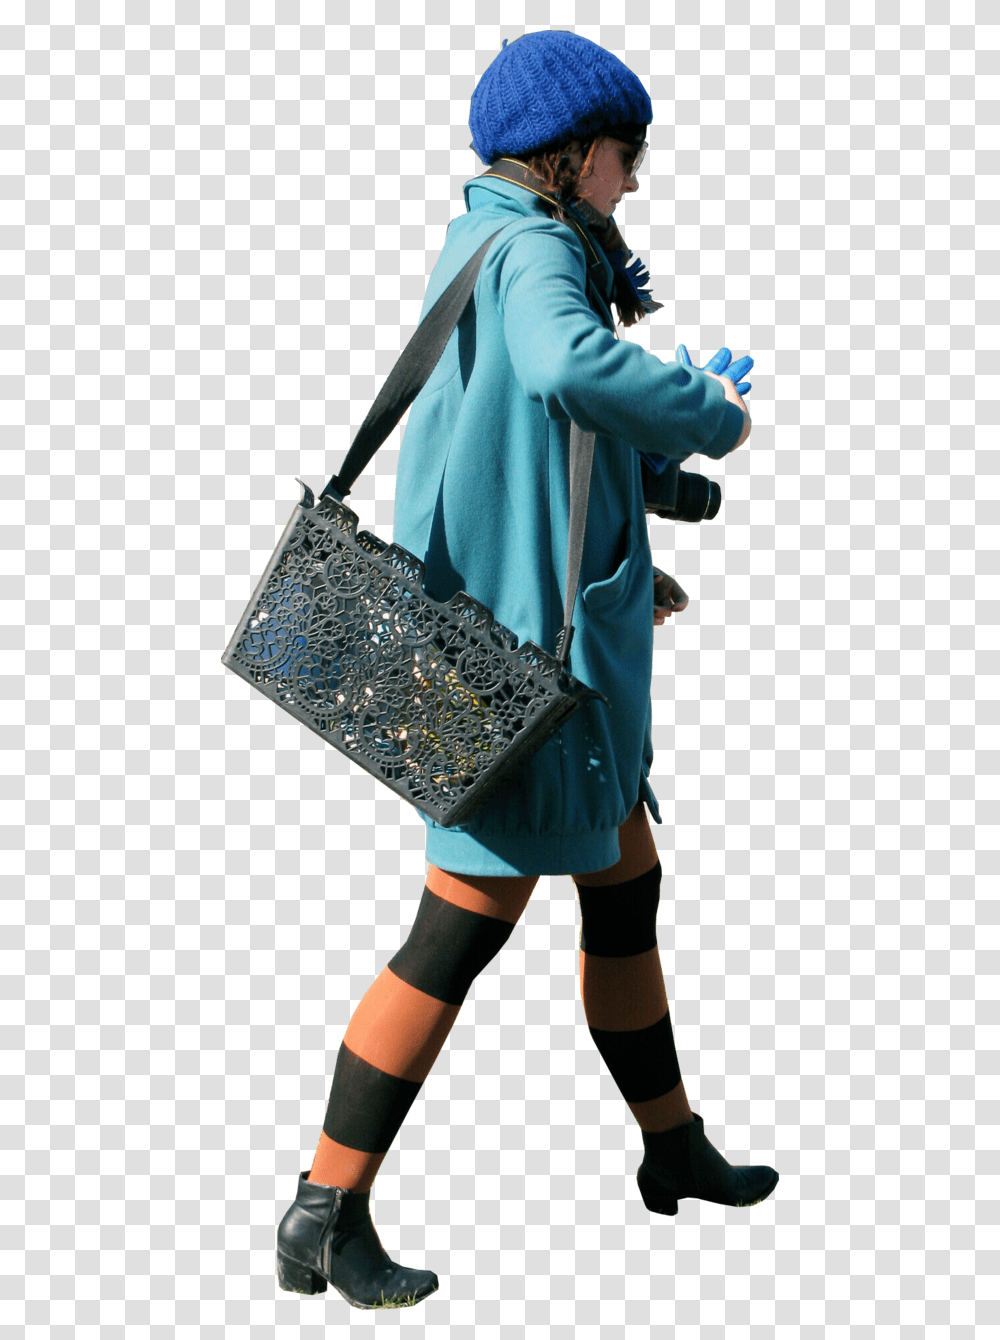 Walking Away Silhouette Cut Out People Winter, Handbag, Accessories, Accessory, Person Transparent Png